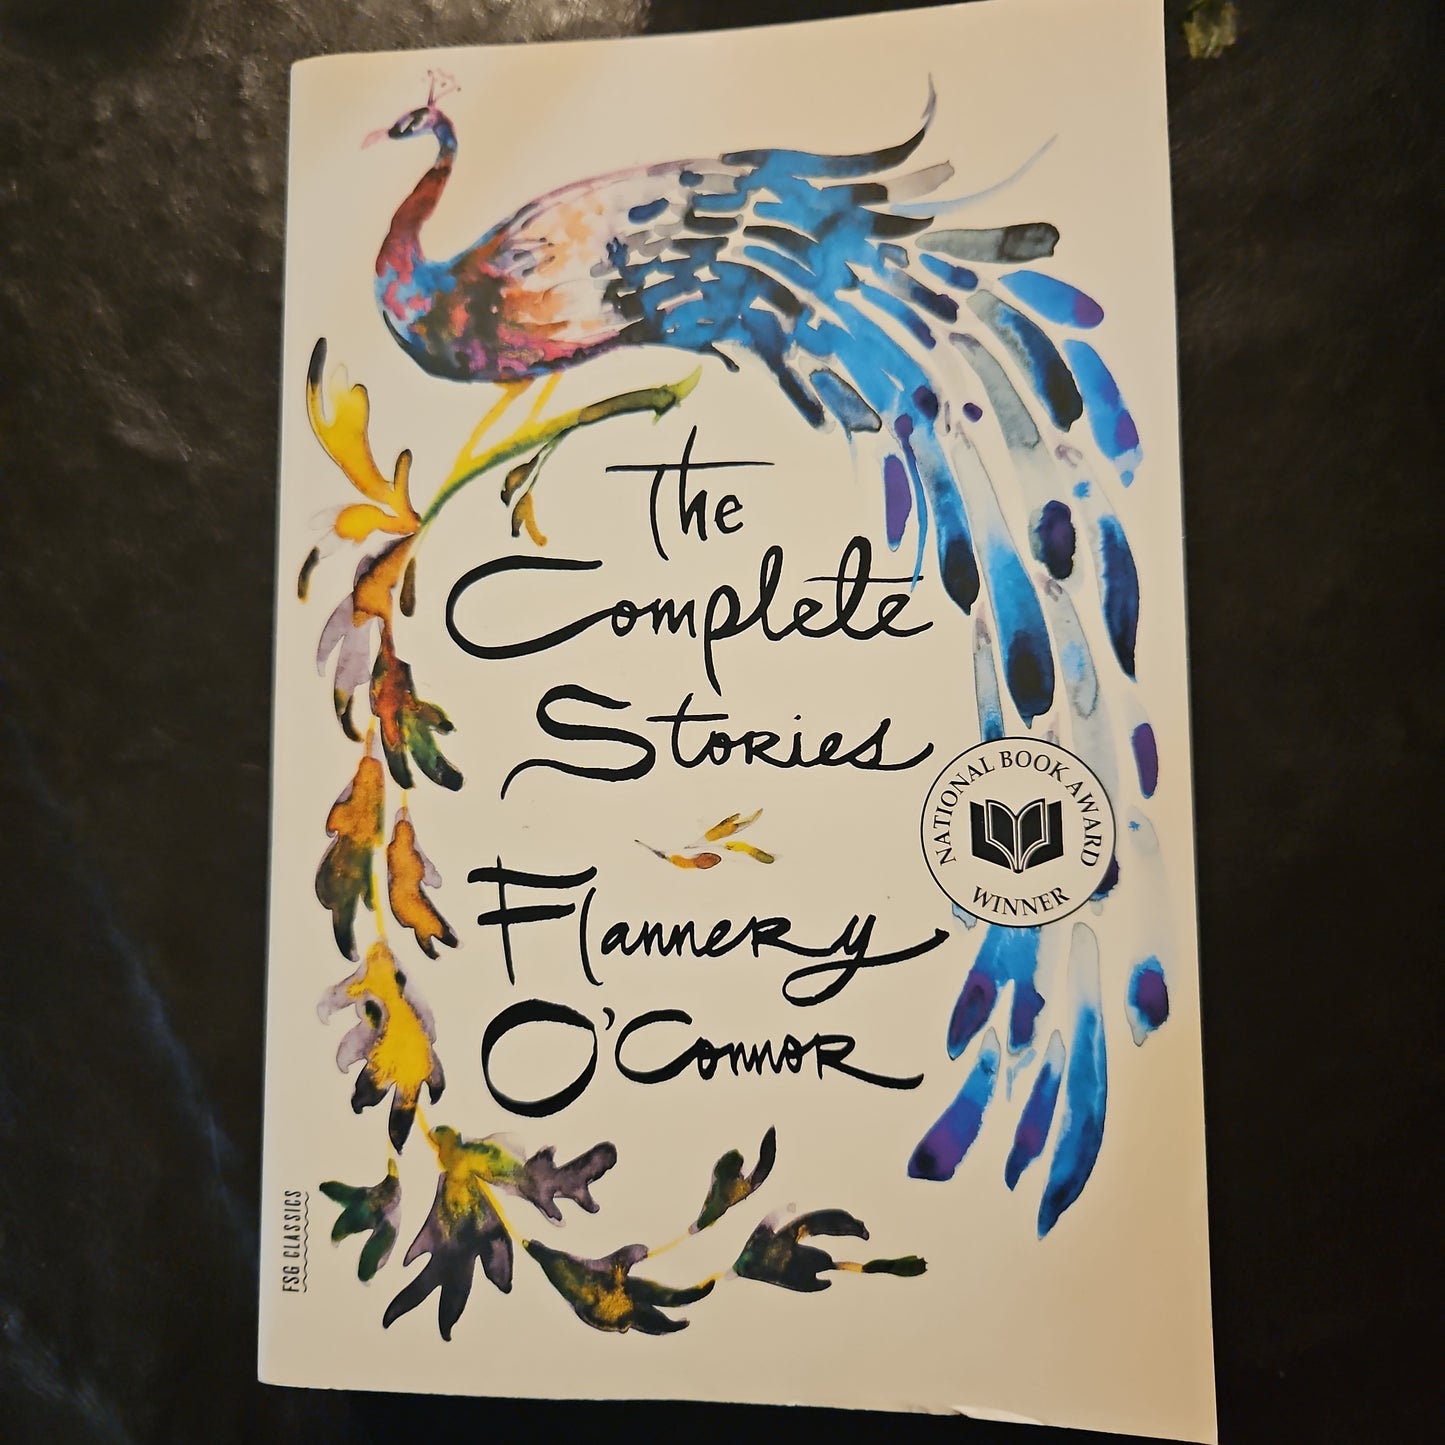 The Complete Short Stories of Flannery O'Connor